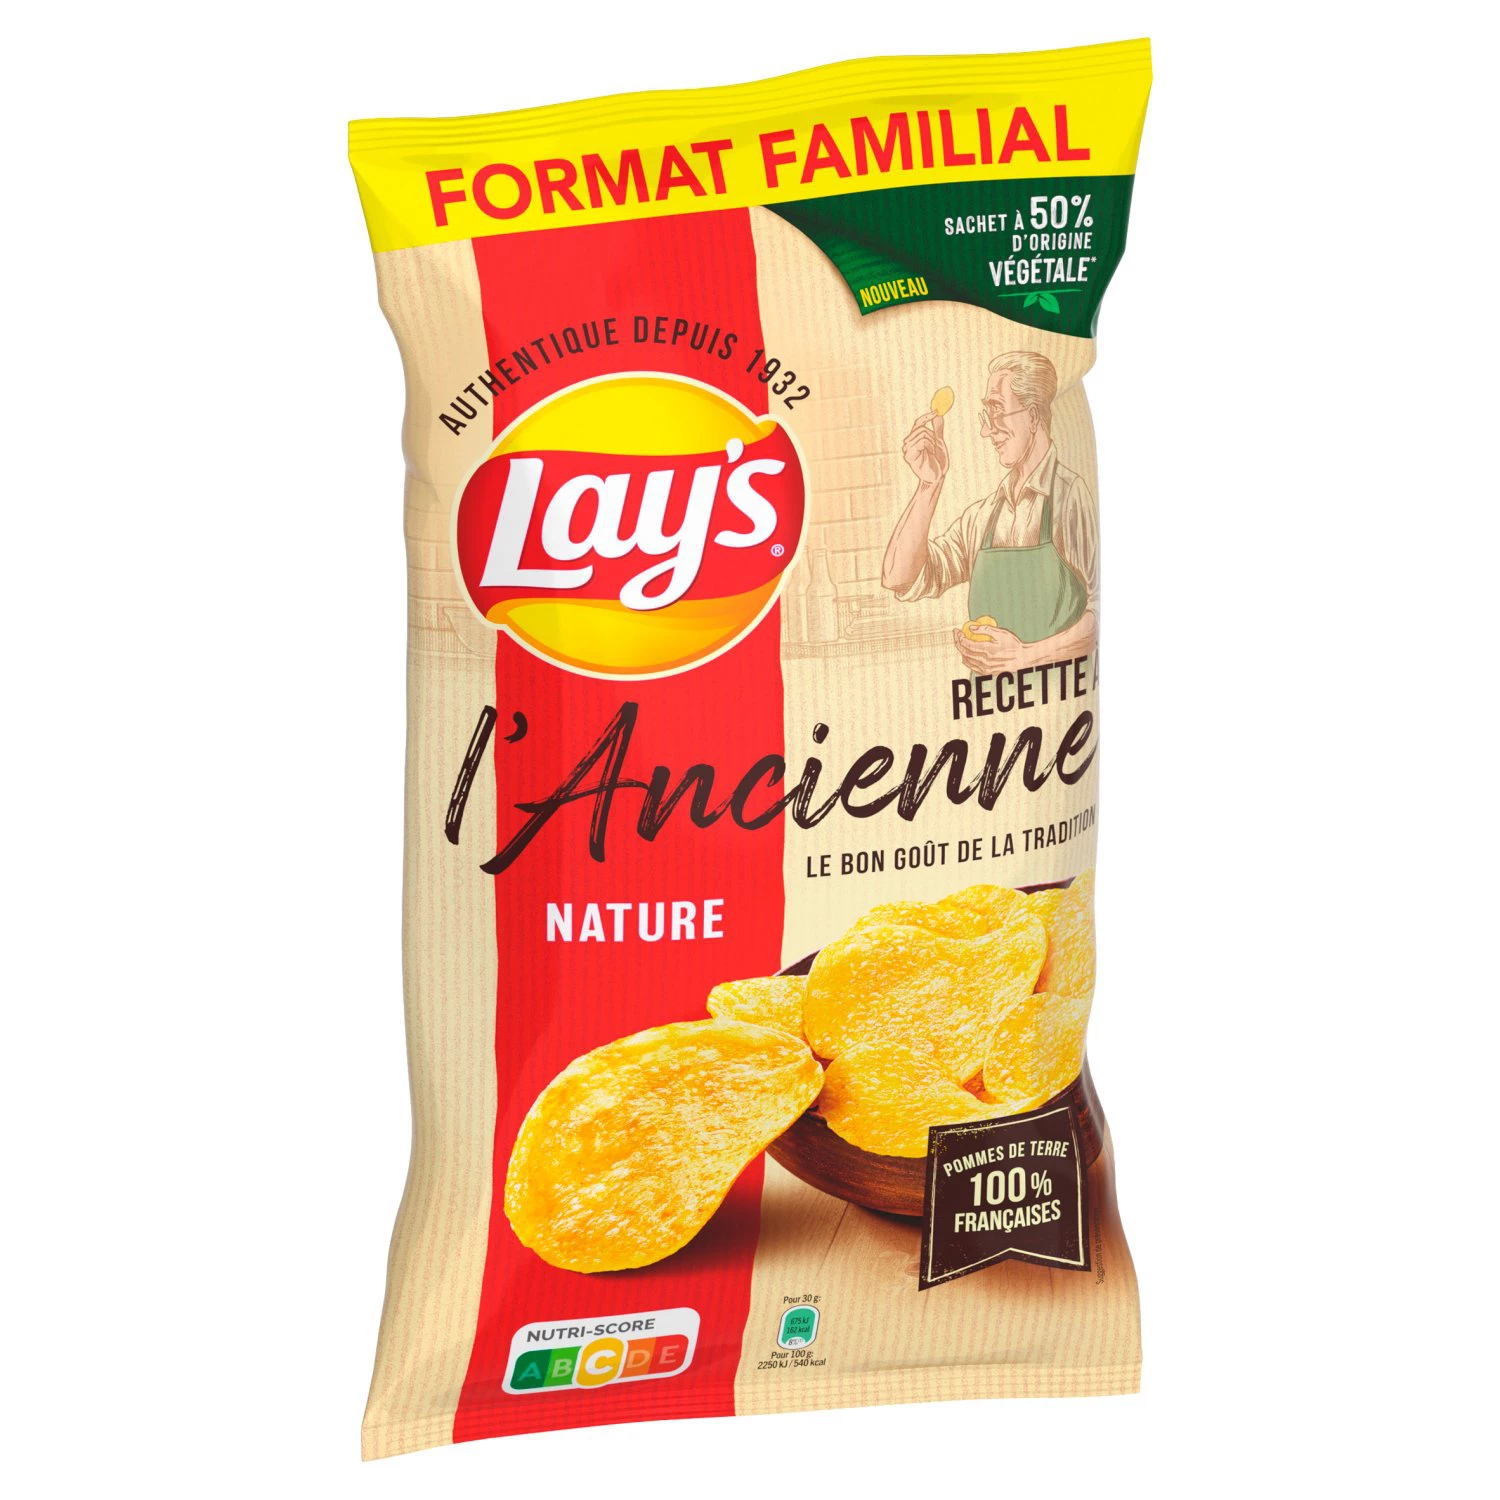 Family Old-Fashioned Crisps, 295g - LAY'S